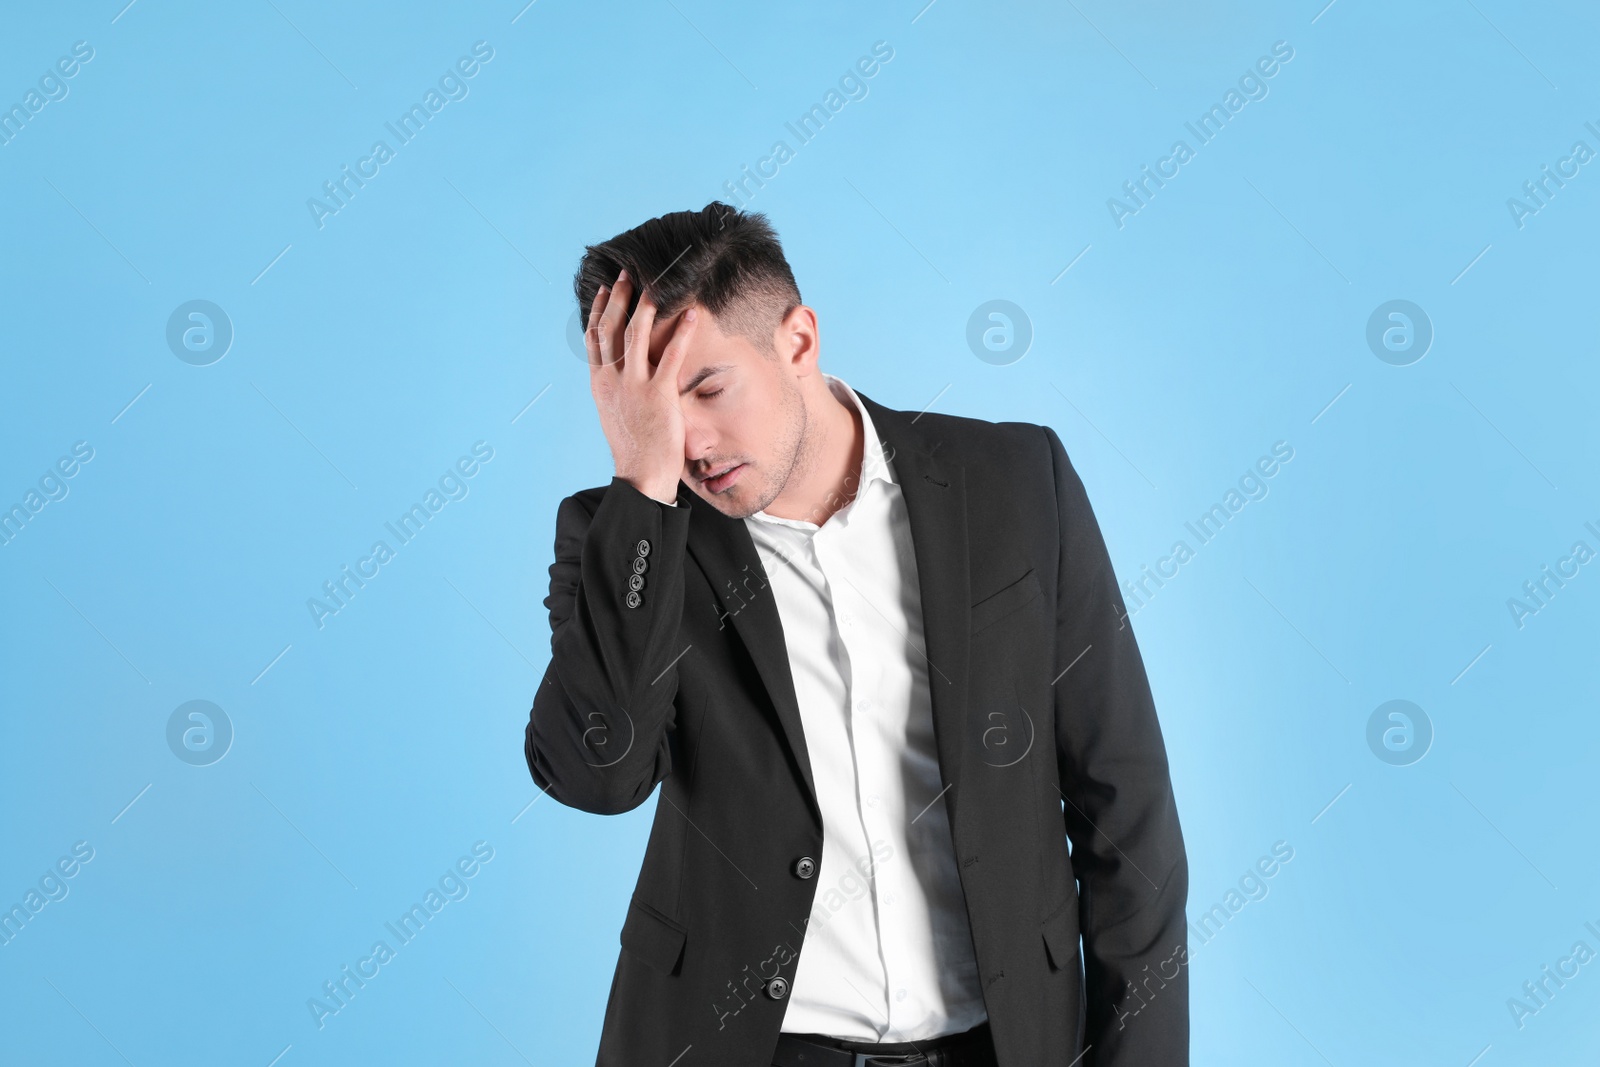 Photo of Upset man in suit on light blue background